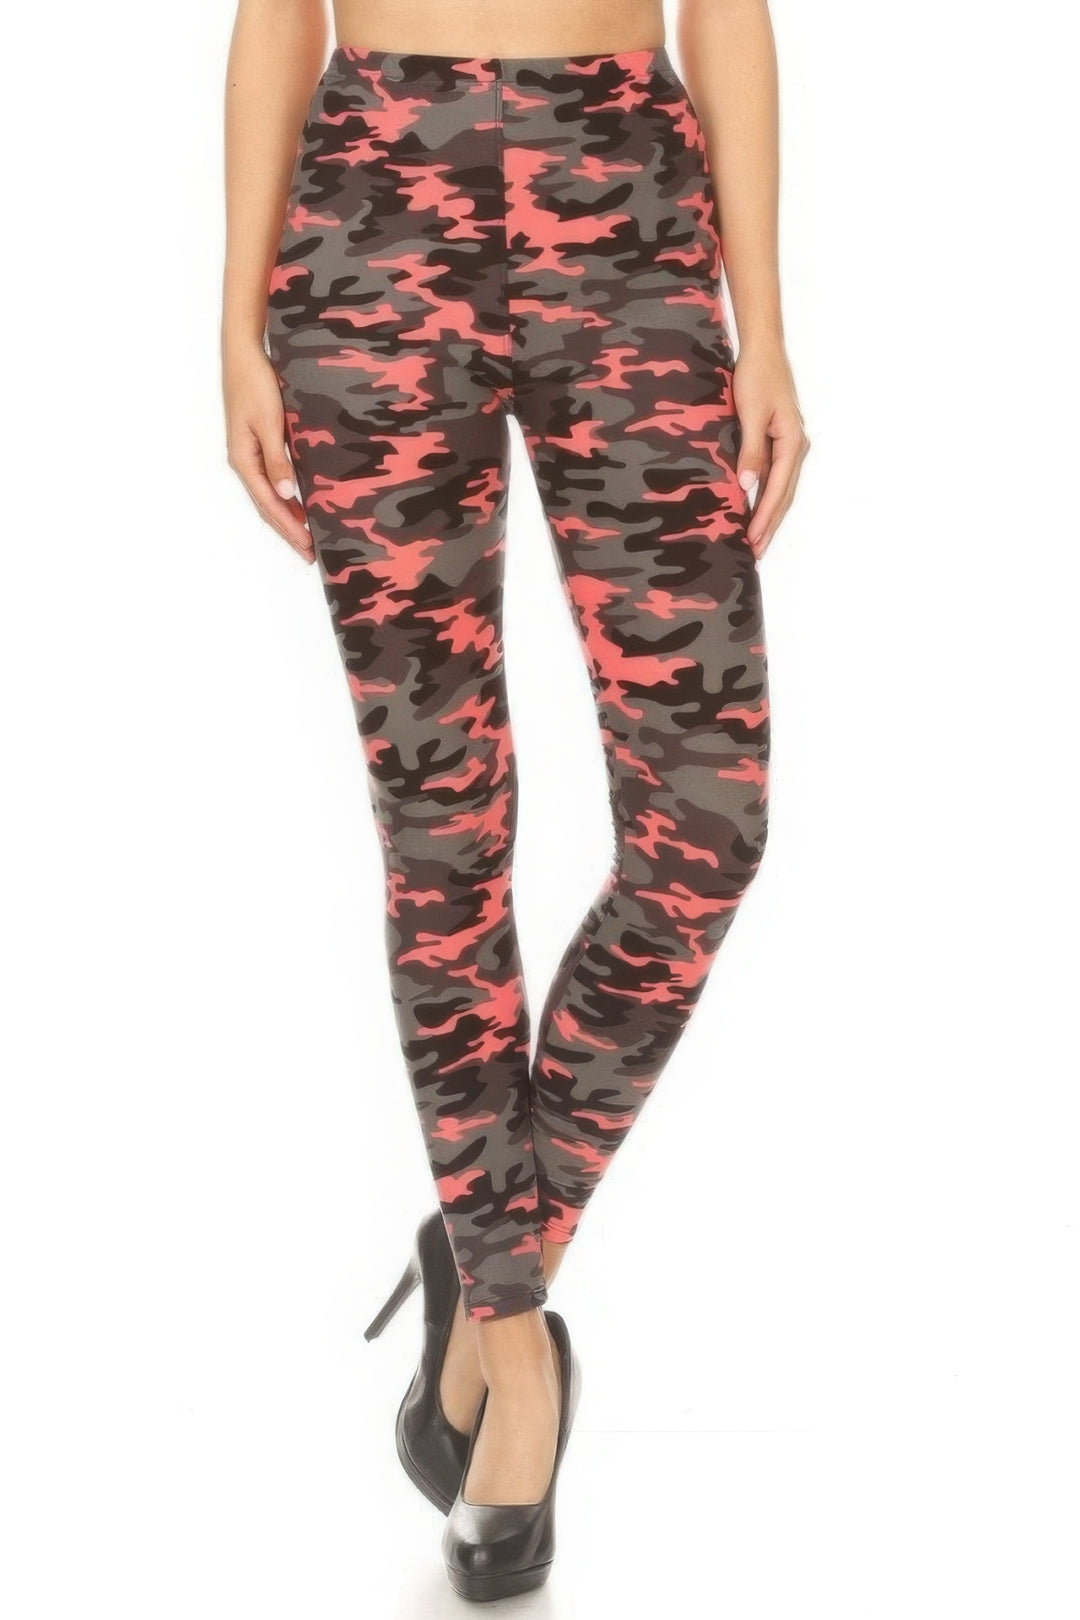 a person in black and red camouflage print leggings